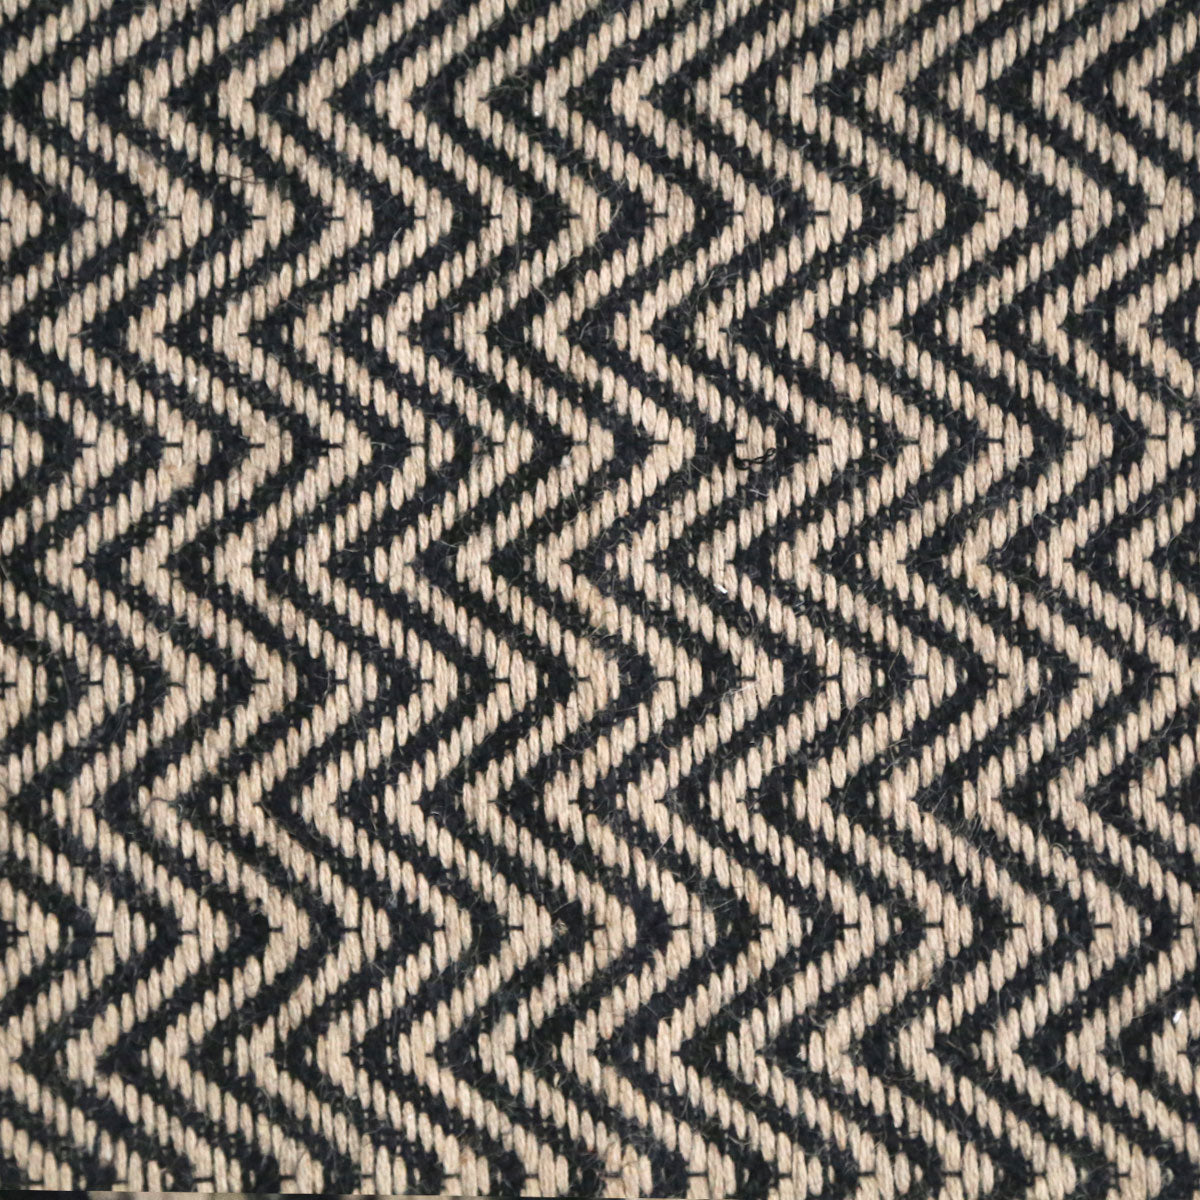 Jute Entry Mat, Zig Zag Natural and Black, 60x90cm